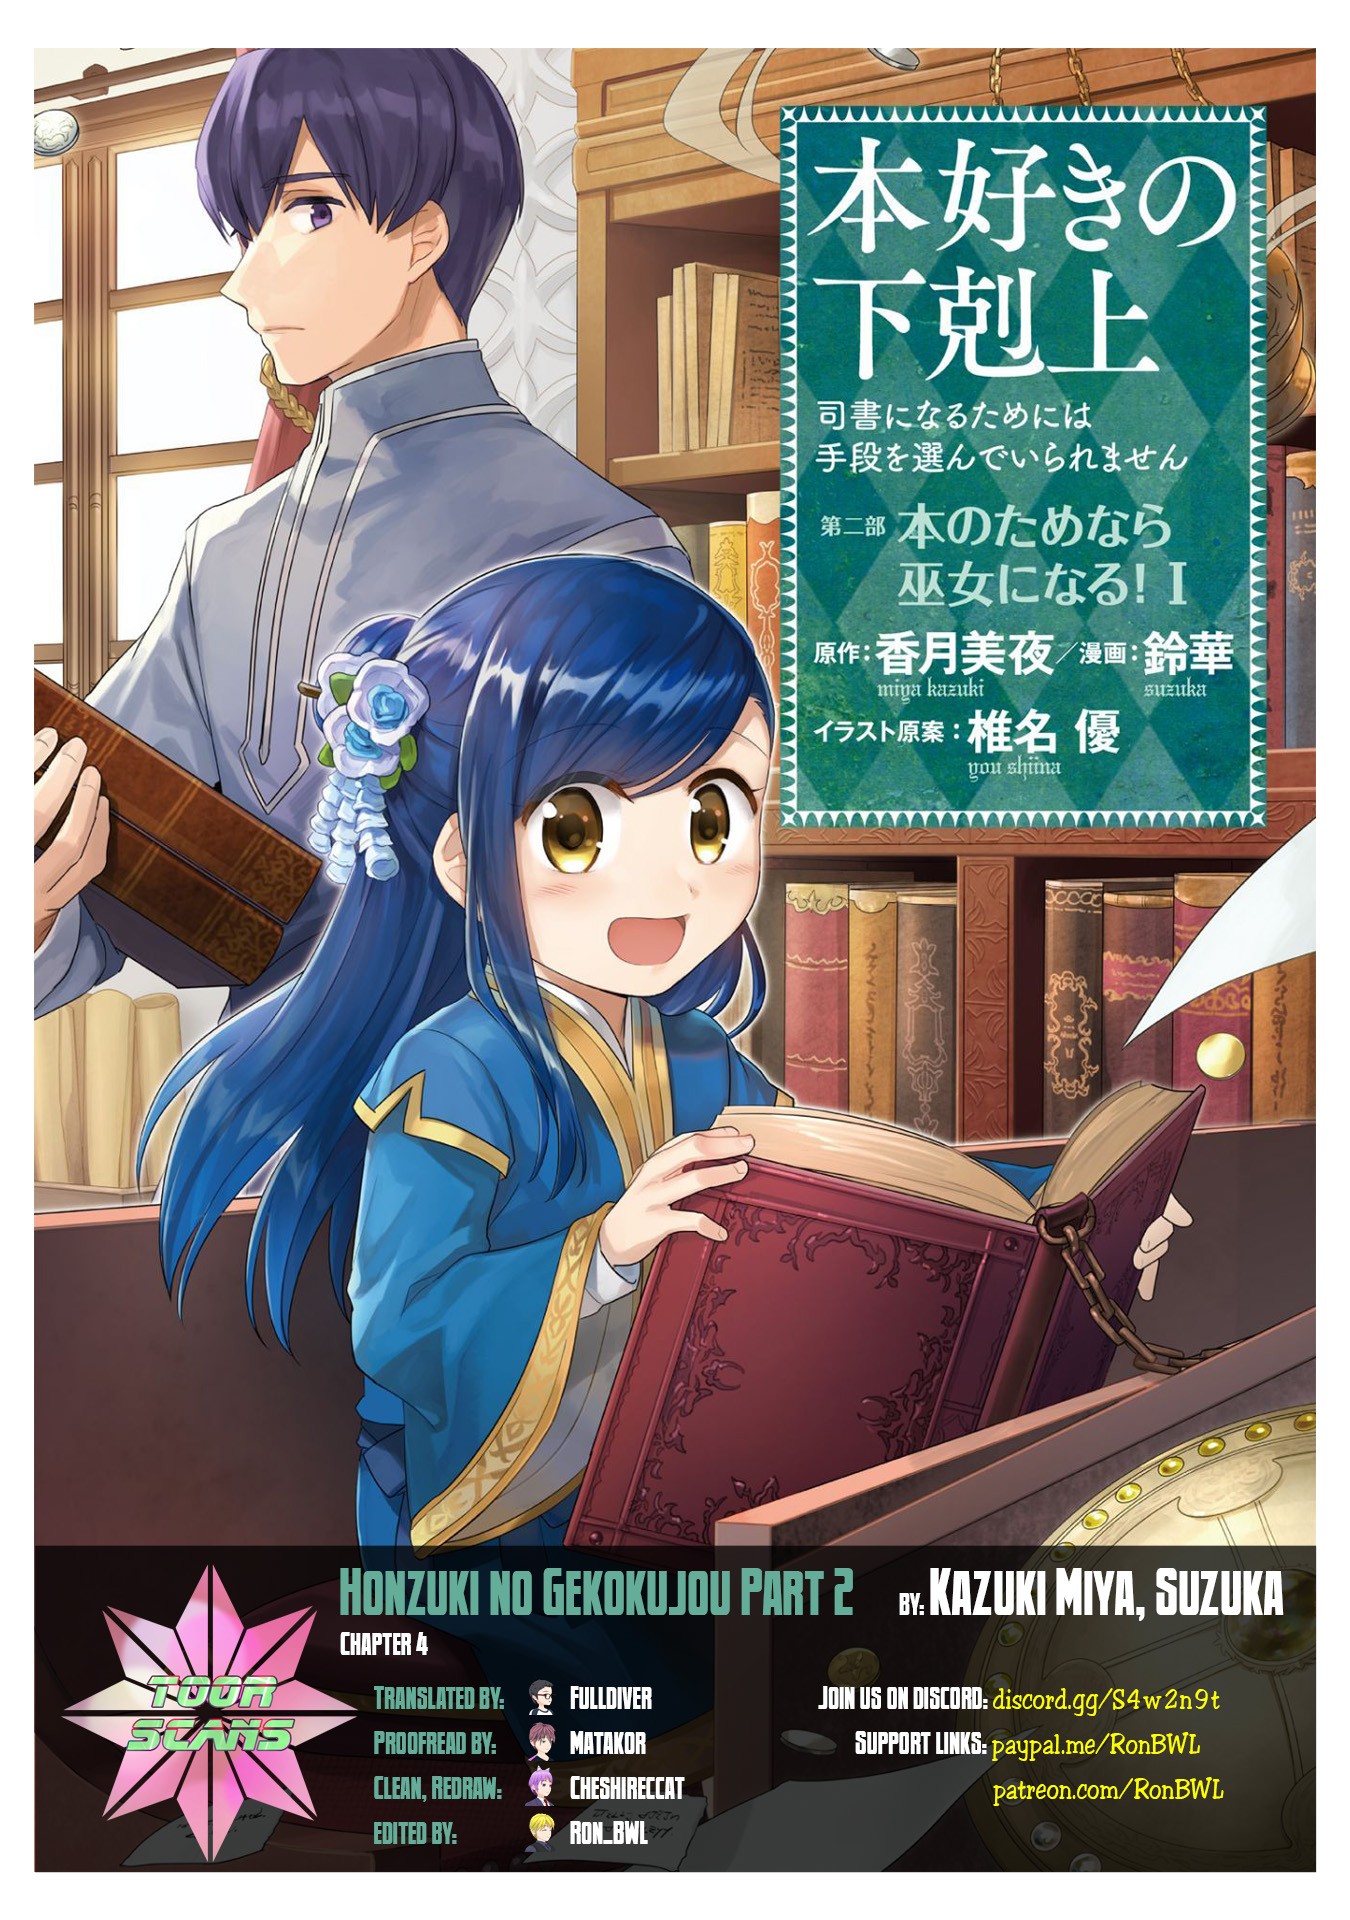 Ascendance Of A Bookworm ~I'll Do Anything To Become A Librarian~ Part 2 「I'll Become A Shrine Maiden For Books!」 Chapter 4